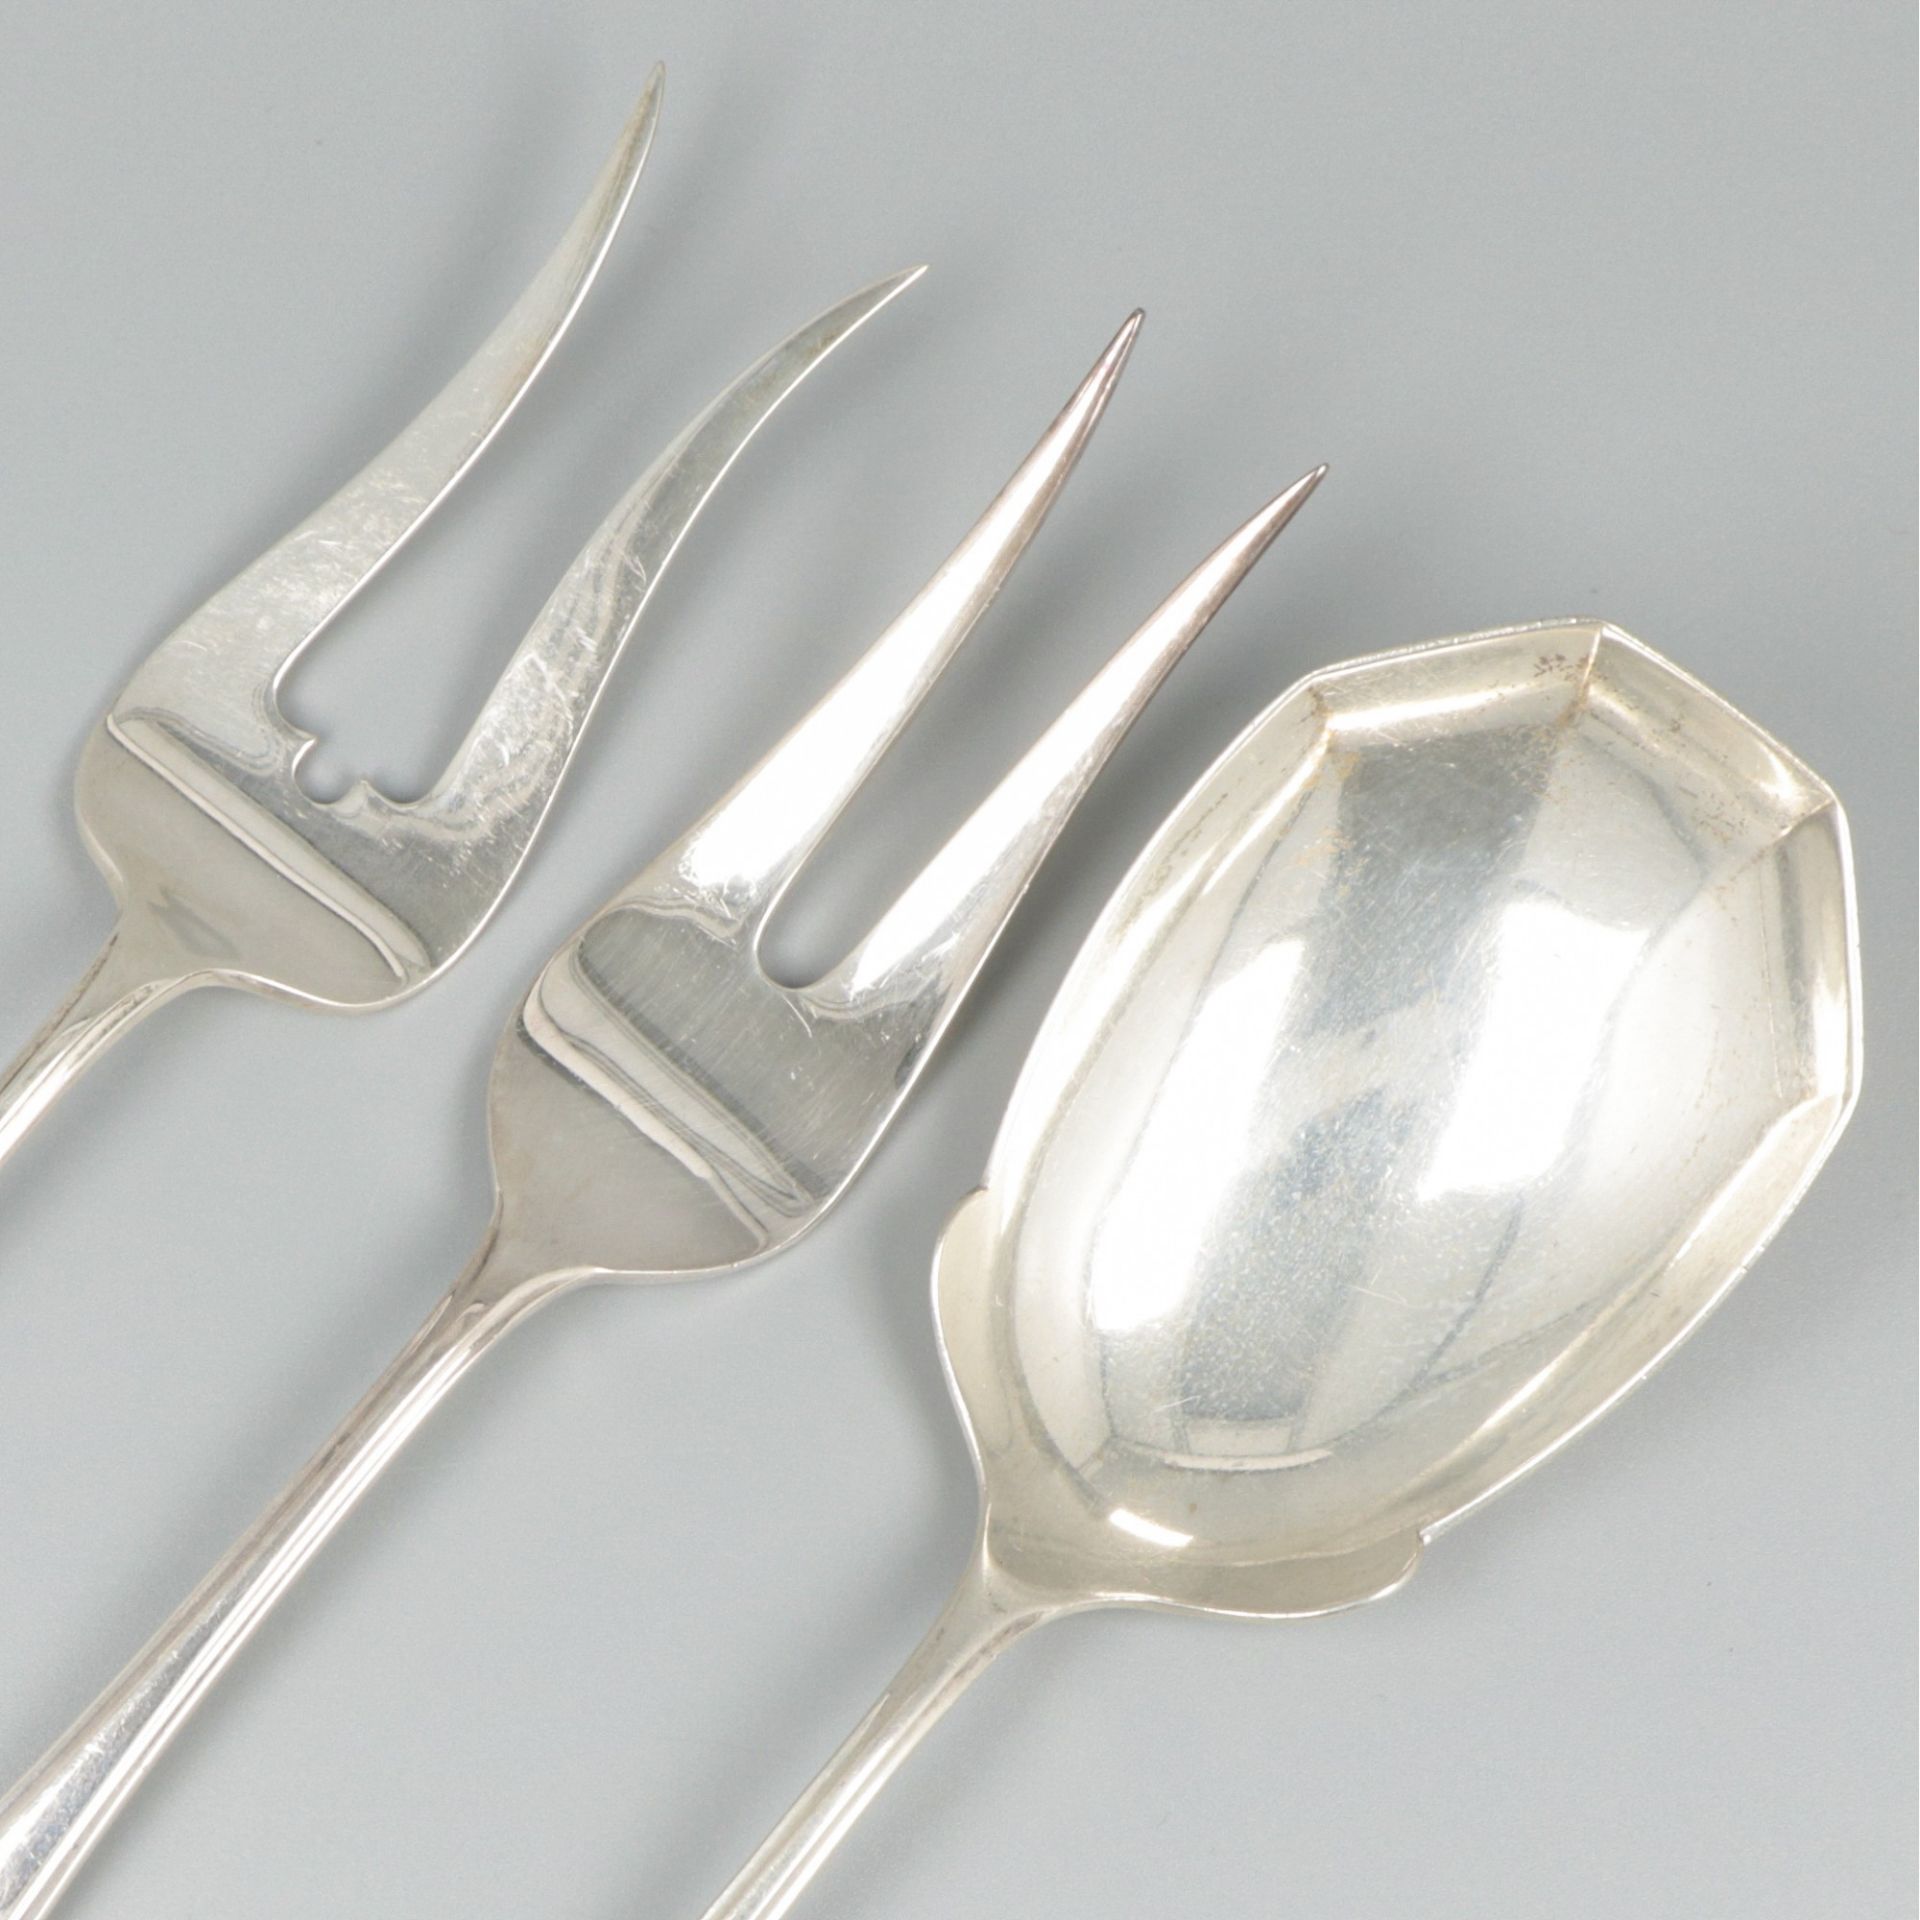 3-piece lot silver cutlery. - Image 3 of 6